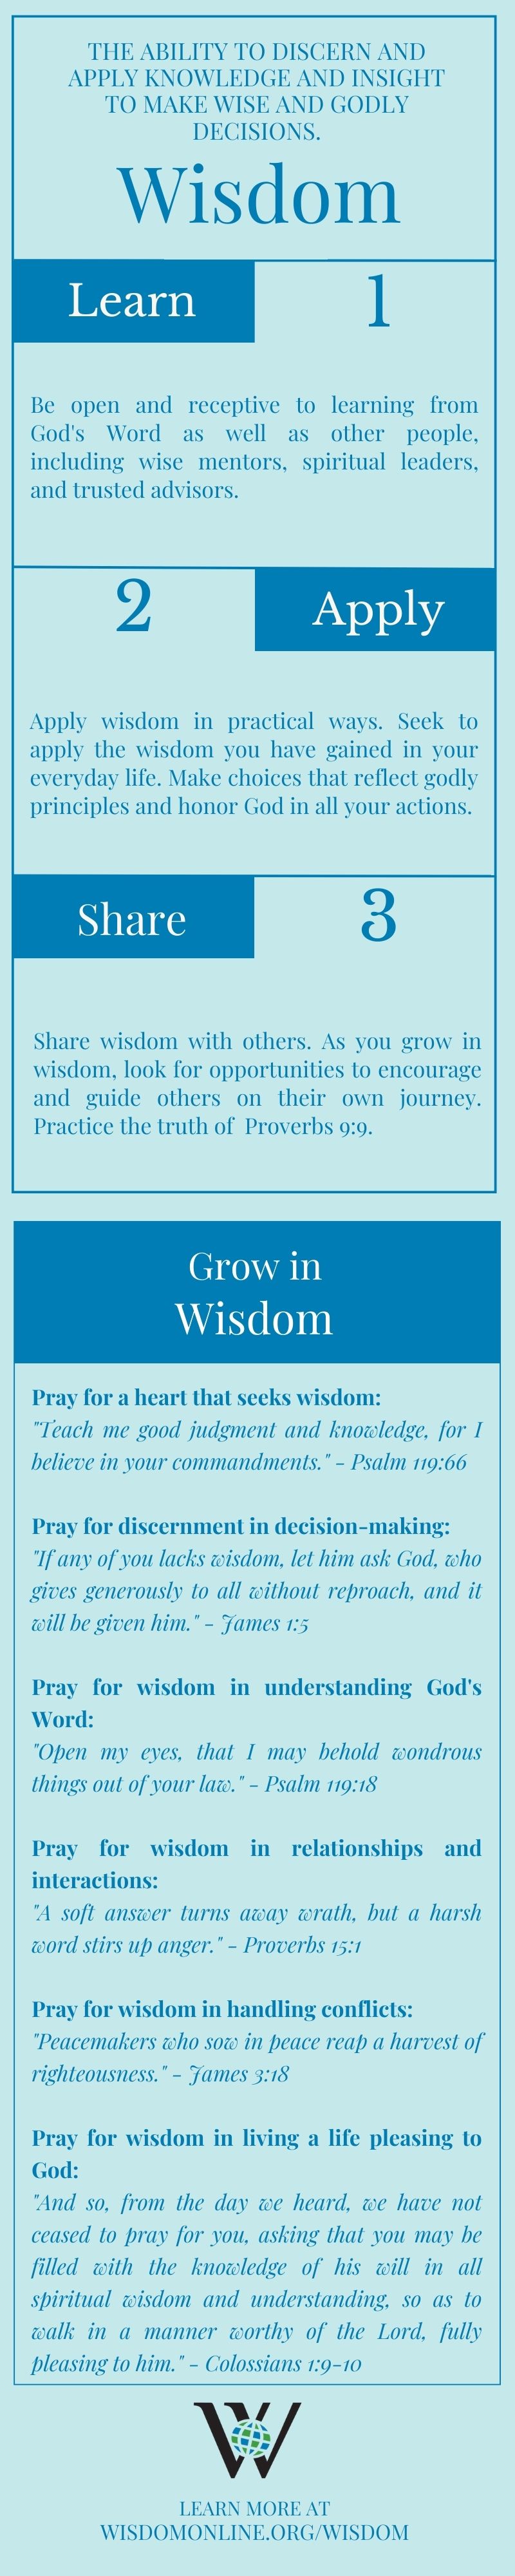 Infographic on the Biblical characteristic of Wisdom